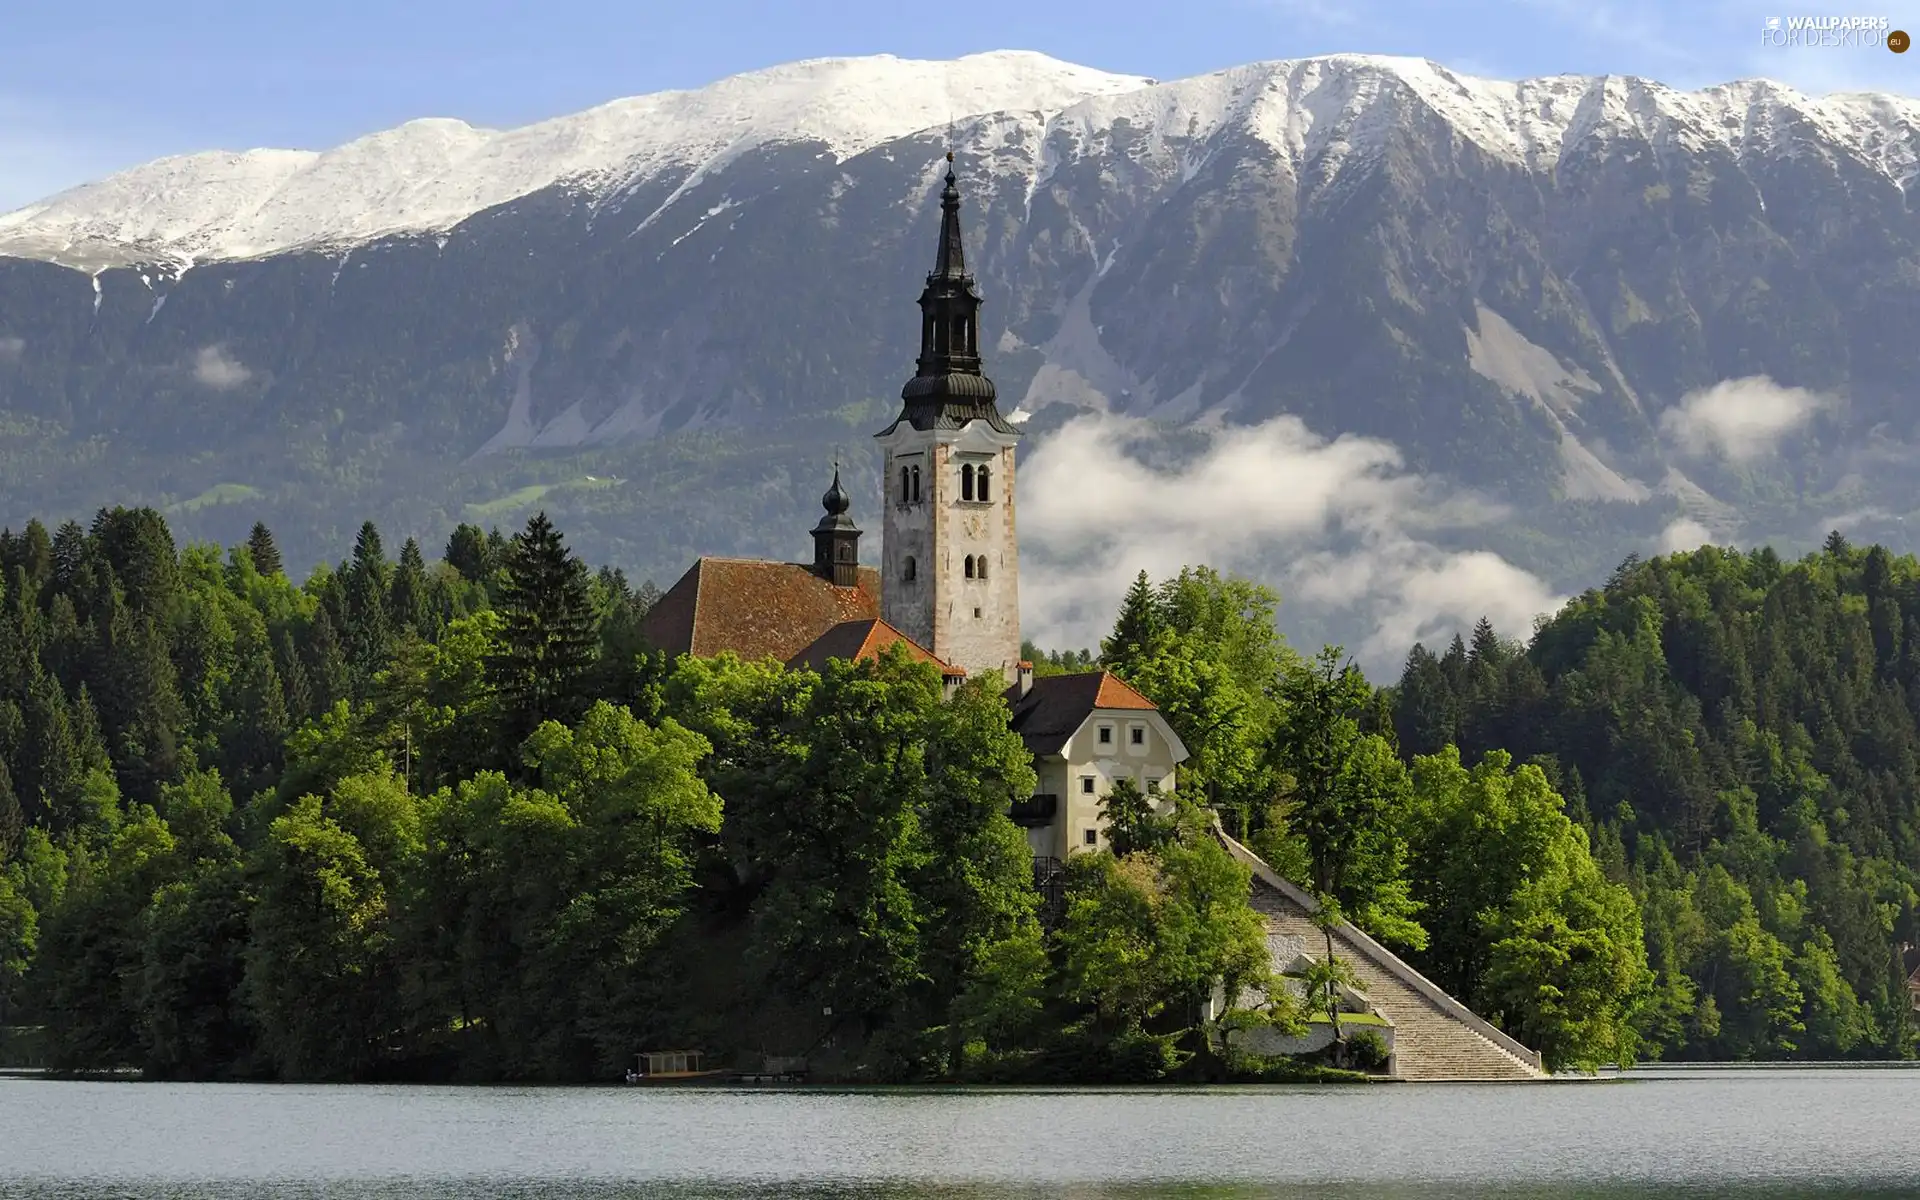 Mountains, woods, church, River